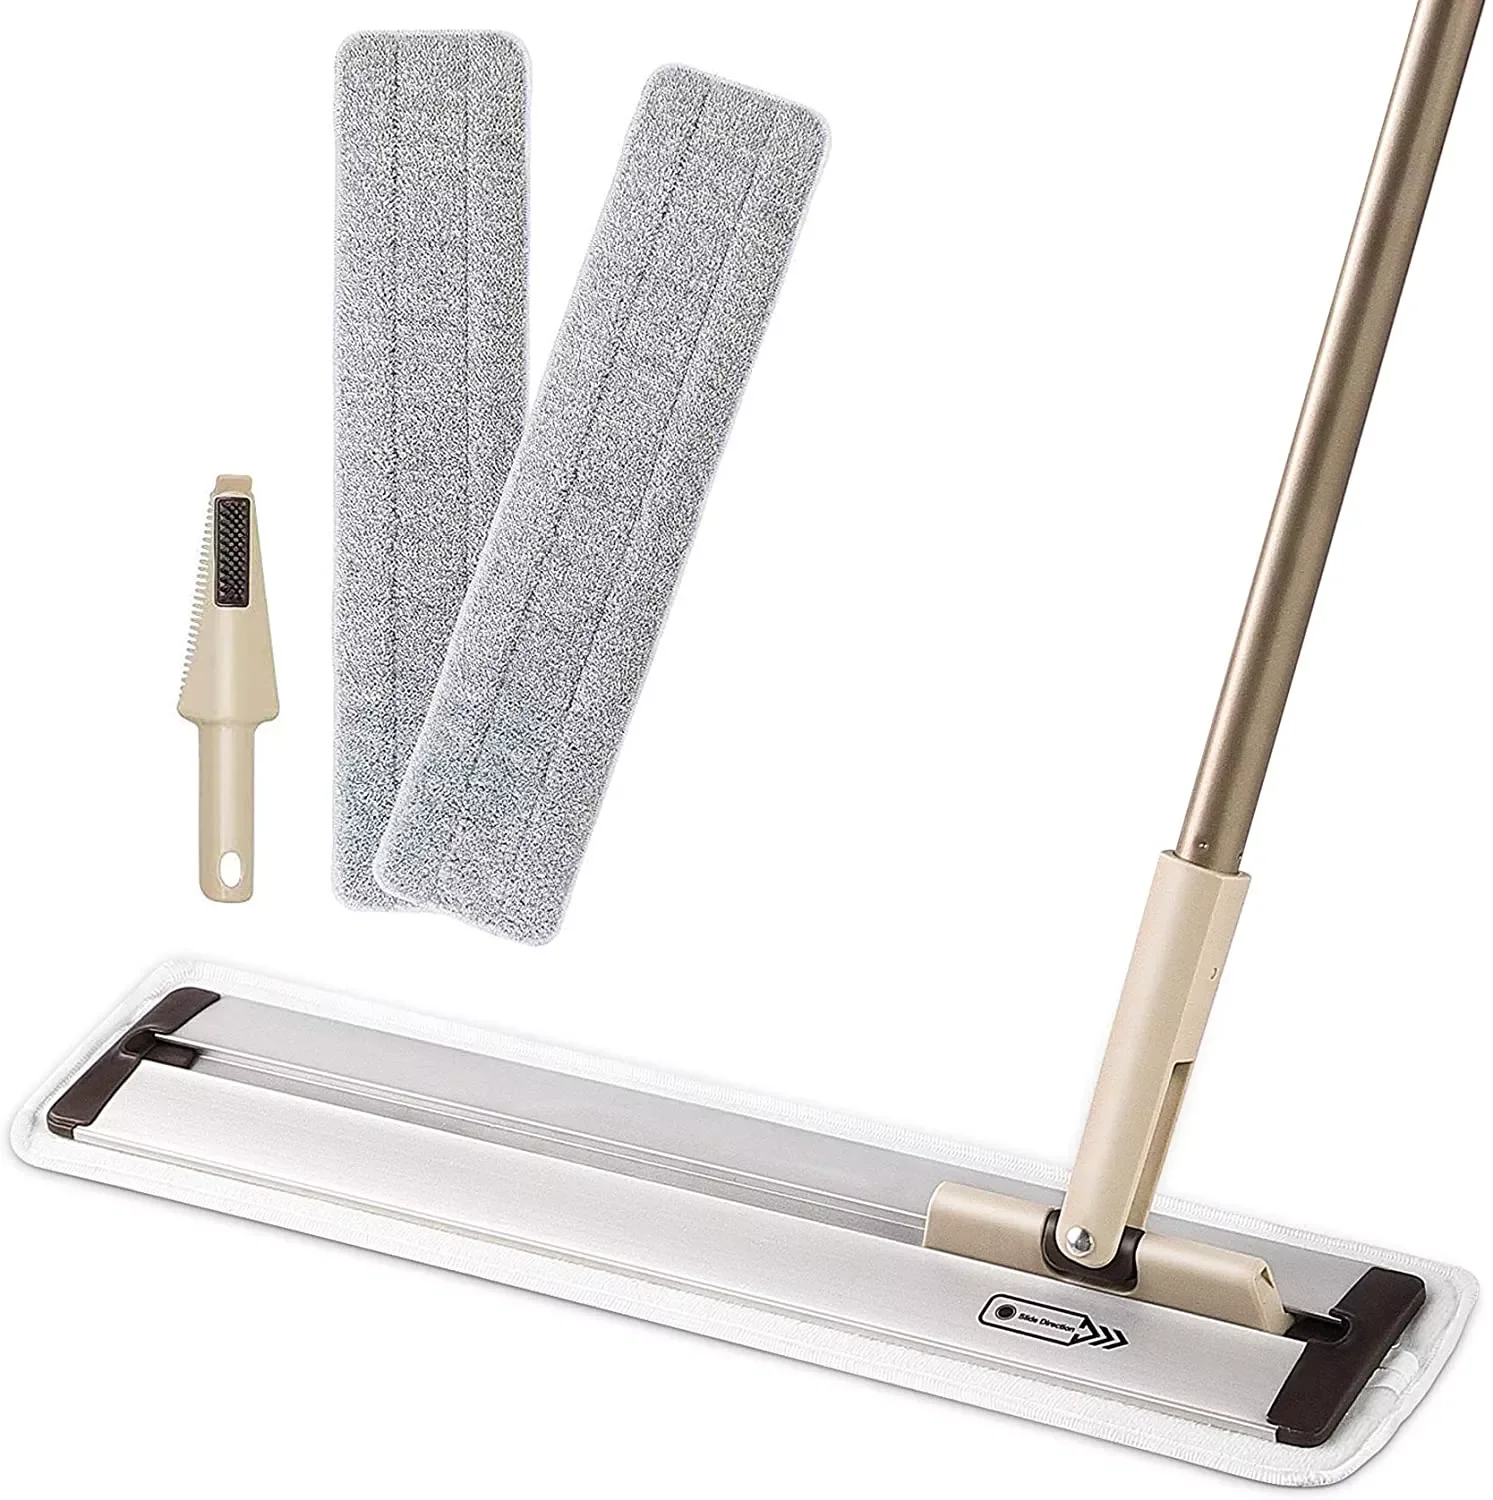 Aluminum Head Flat Mops Microfiber Mop Designed for Bed Bottom Sofa Bottom and Hard-to-Reach Corners Cleaning